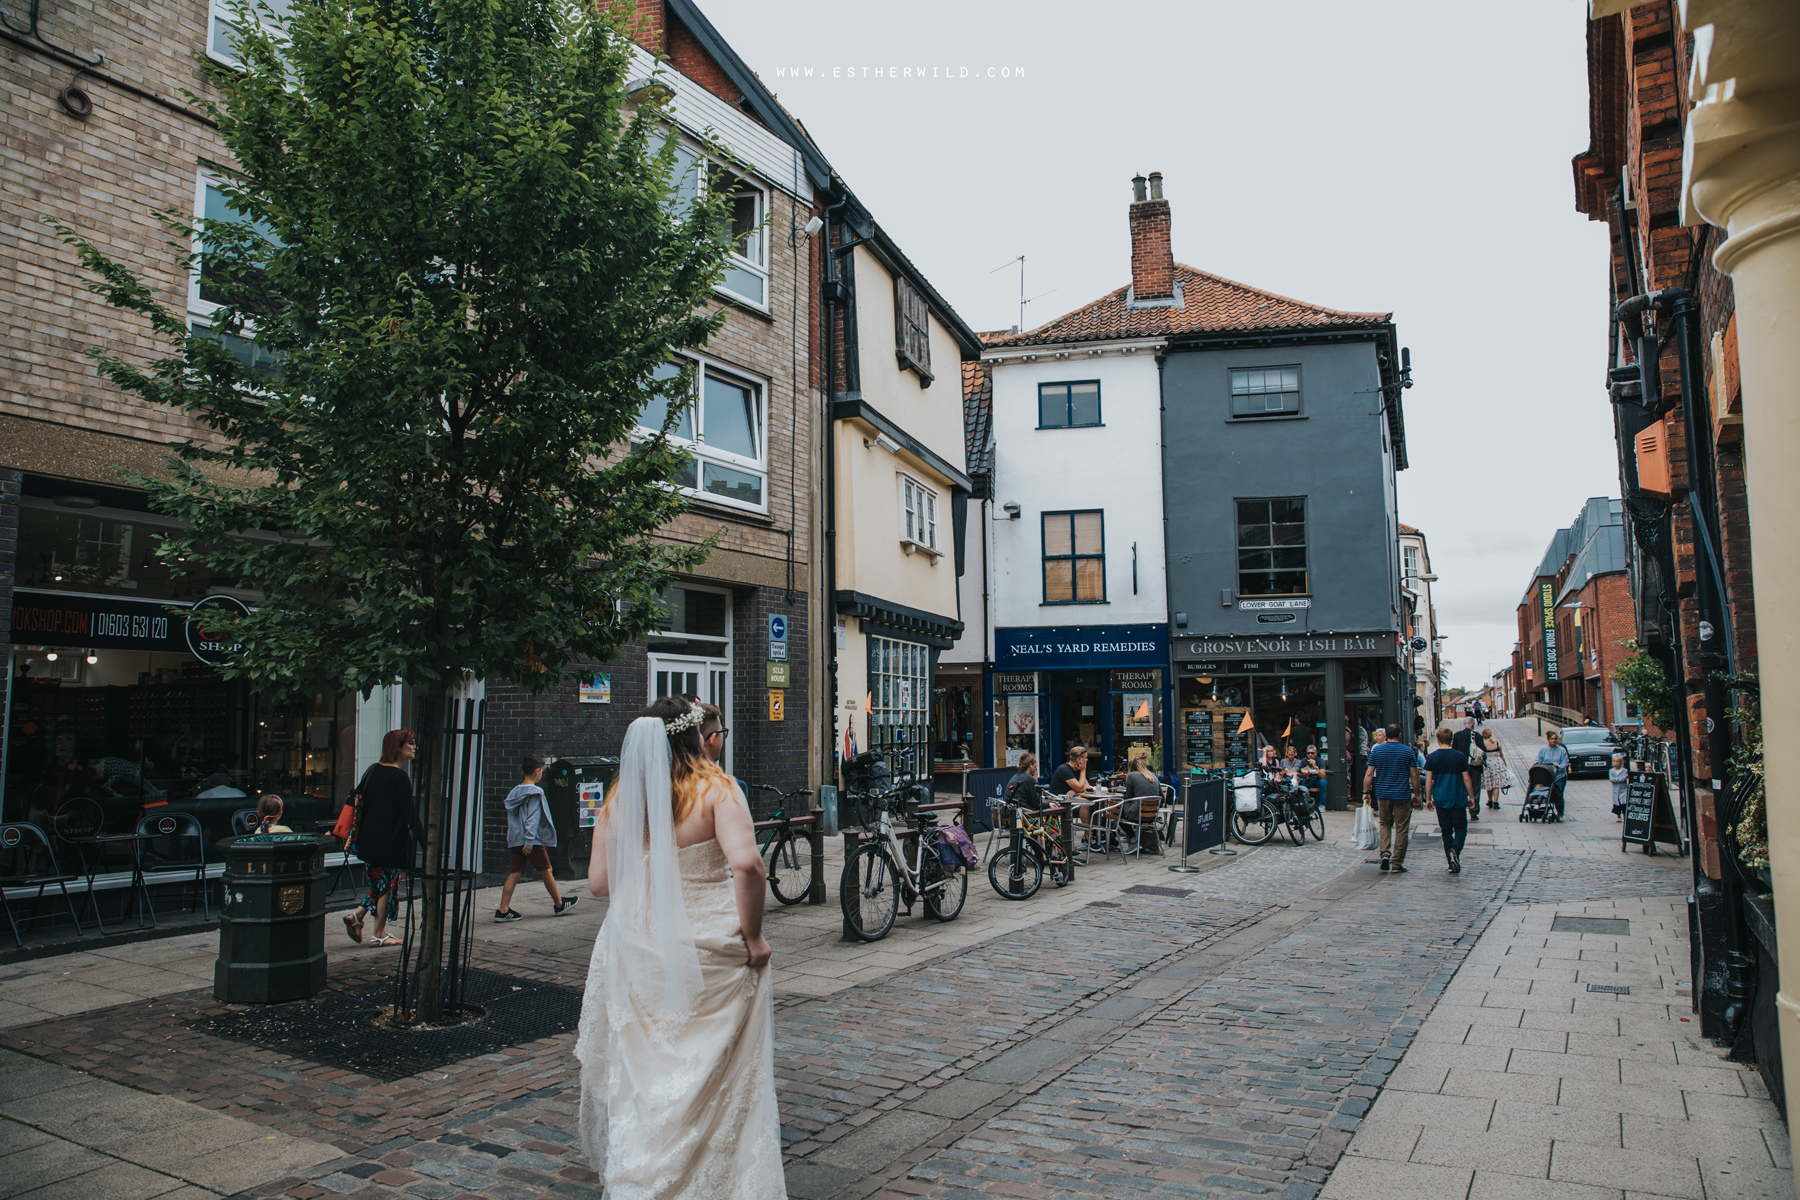 Norwich_Castle_Arcade_Grosvenor_Chip_Birdcage_Cathedral_Cloisters_Refectory_Wedding_Photography_Esther_Wild_Photographer_Norfolk_Kings_Lynn_3R8A1366.jpg